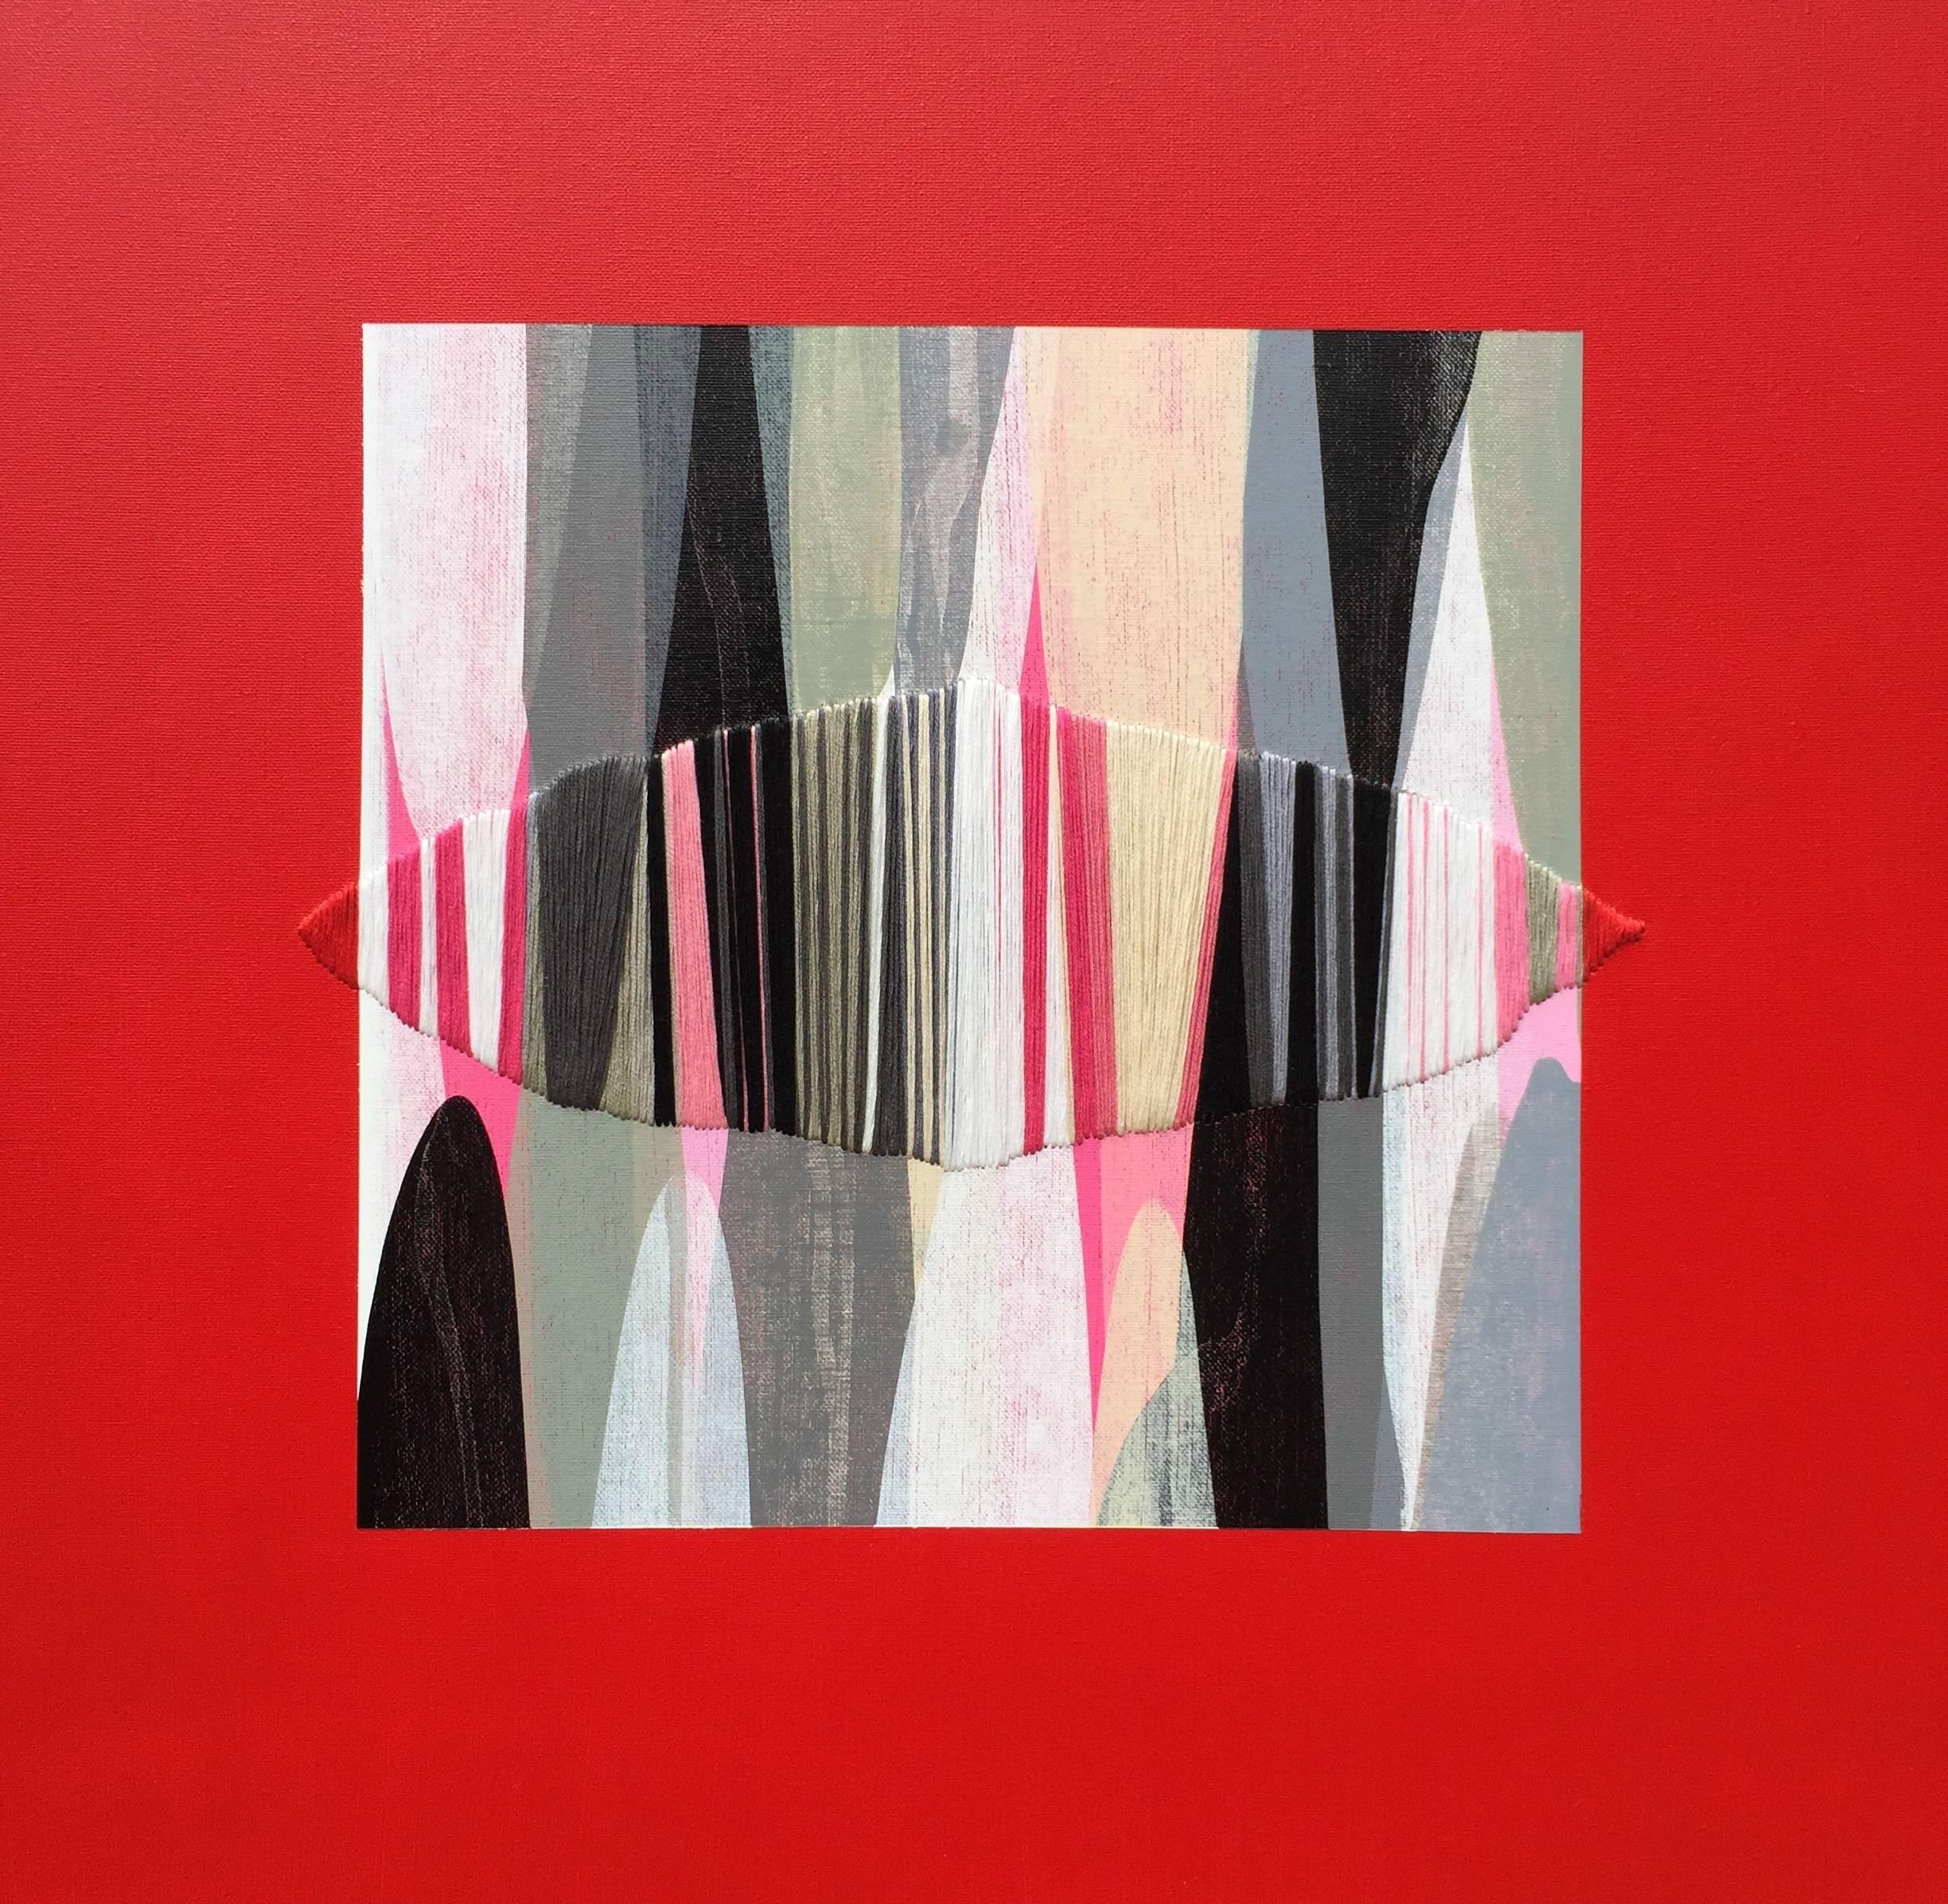 Raul de la Torre Abstract Painting - Poemes XXXVII - Red White and Black Original Mixed Media Artwork on Canvas